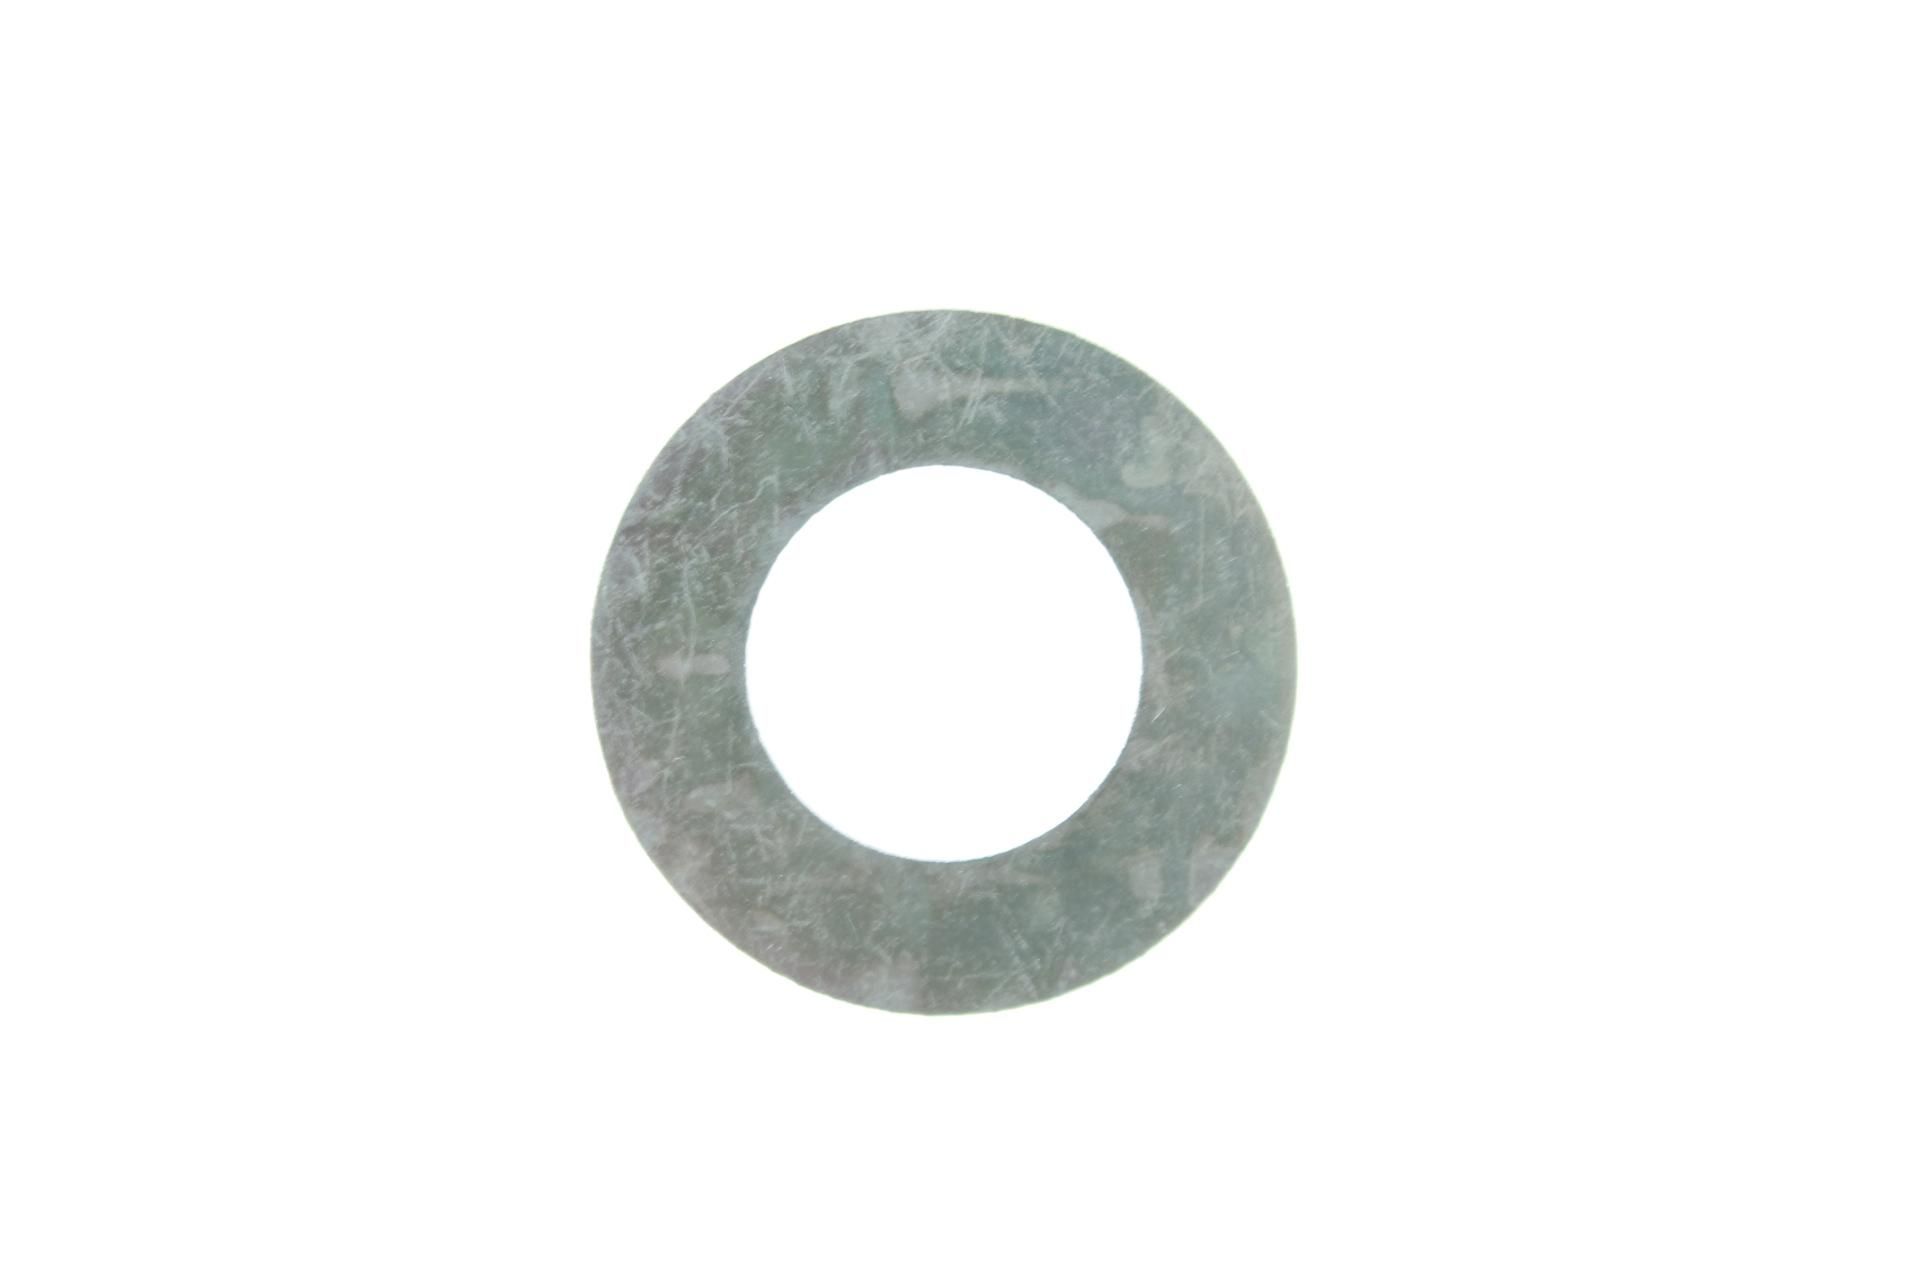 90201-151A7-00 Superseded by 90201-154E9-00 - WASHER,PLATE